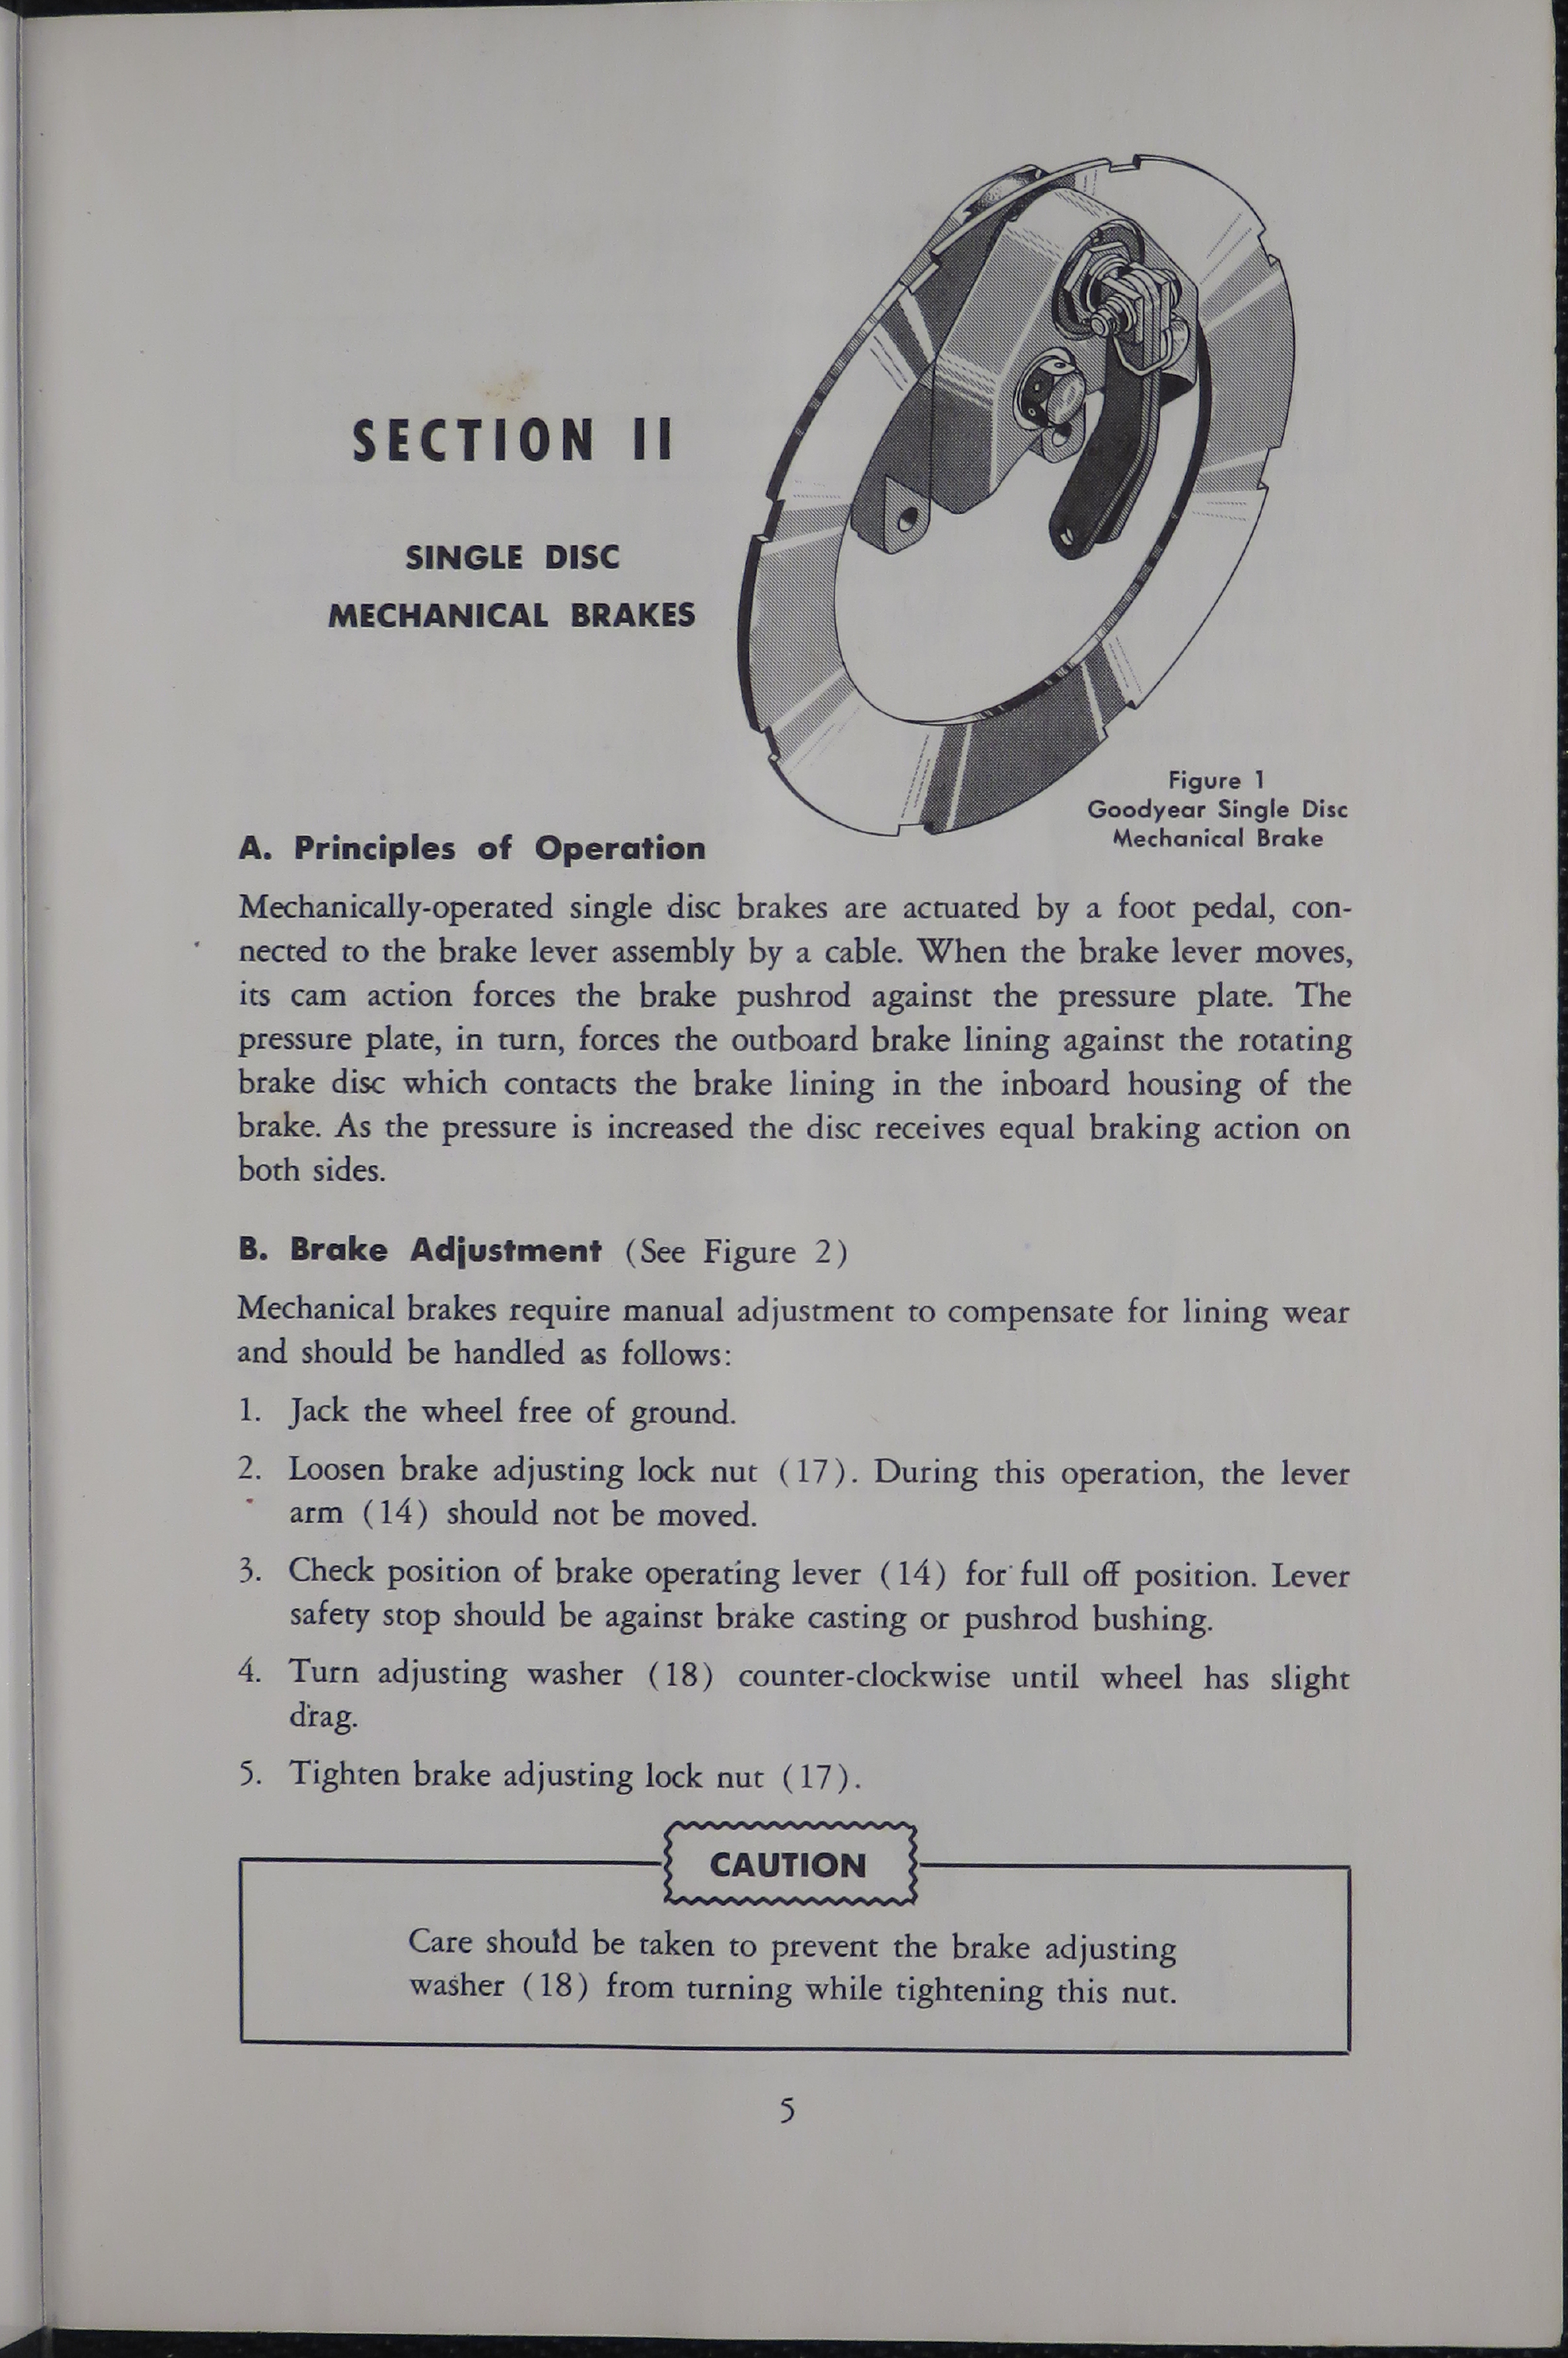 Sample page 7 from AirCorps Library document: Operation and Service Manual for Single Disc Brakes and Wheels for Light Airplanes